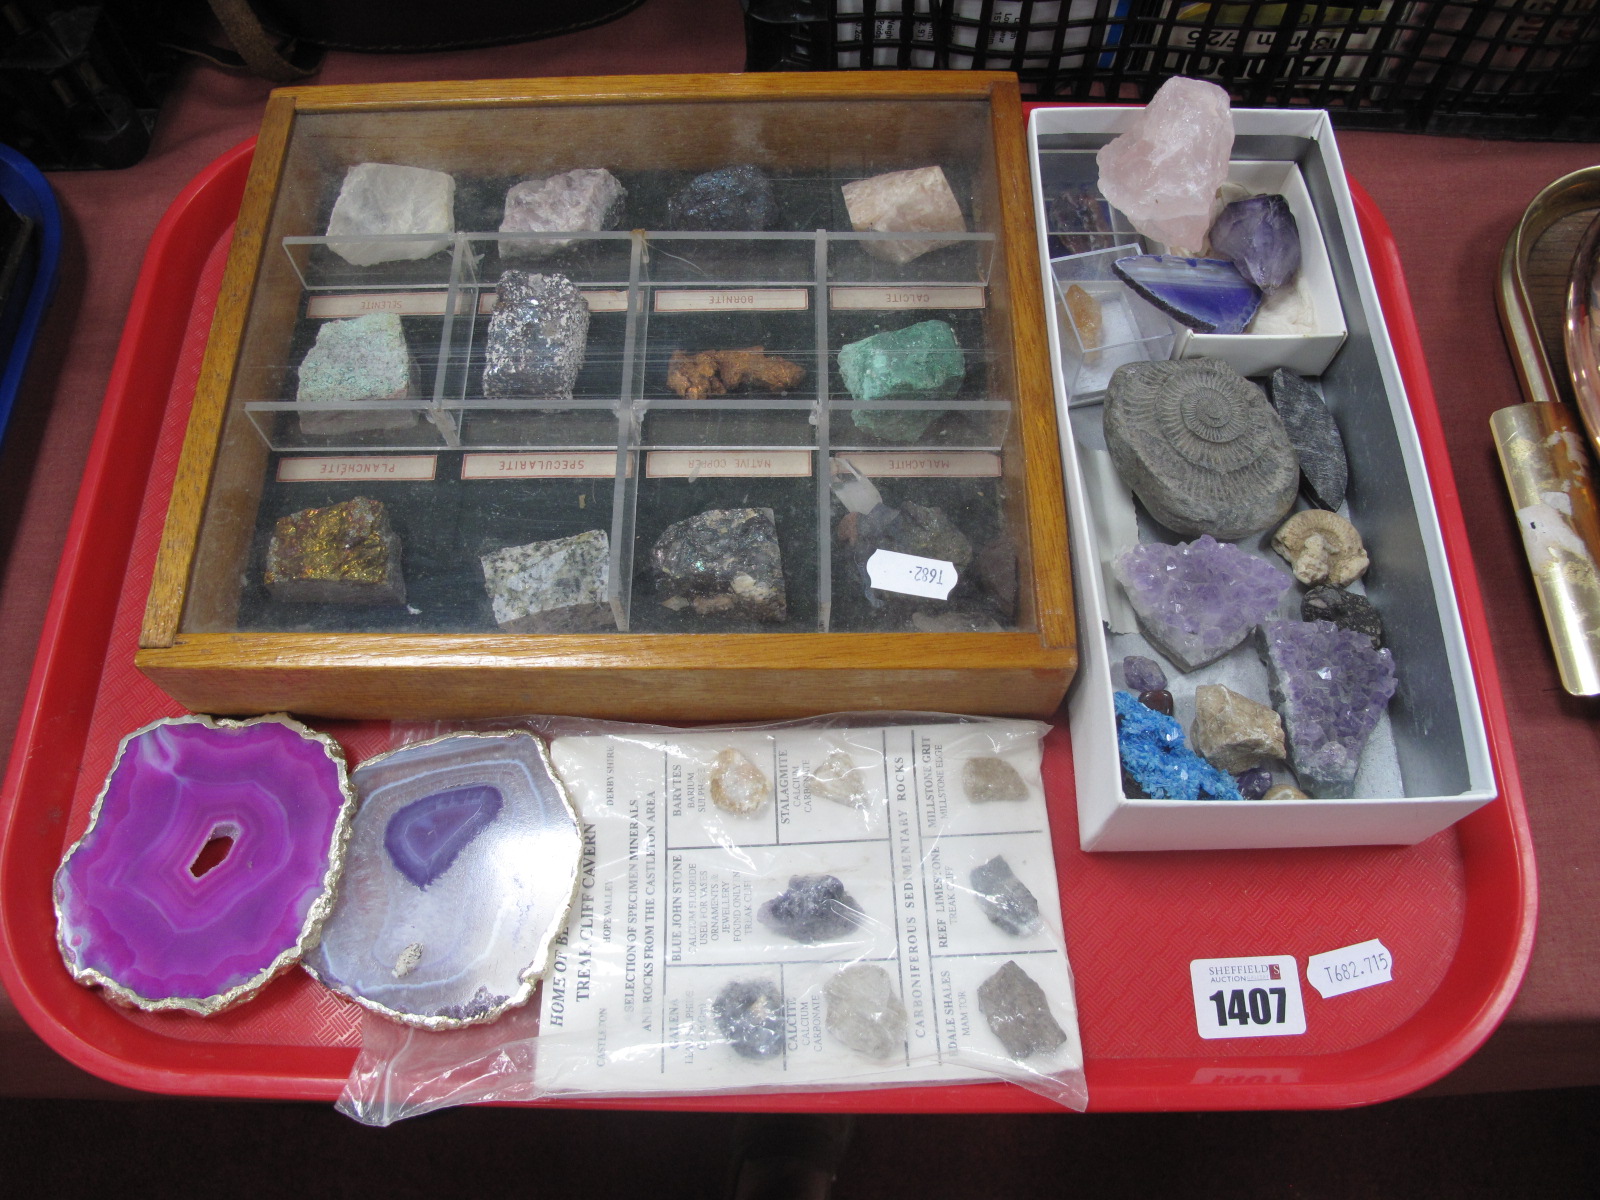 Blue John, Amethyst and other mineral specimens, ammonites.